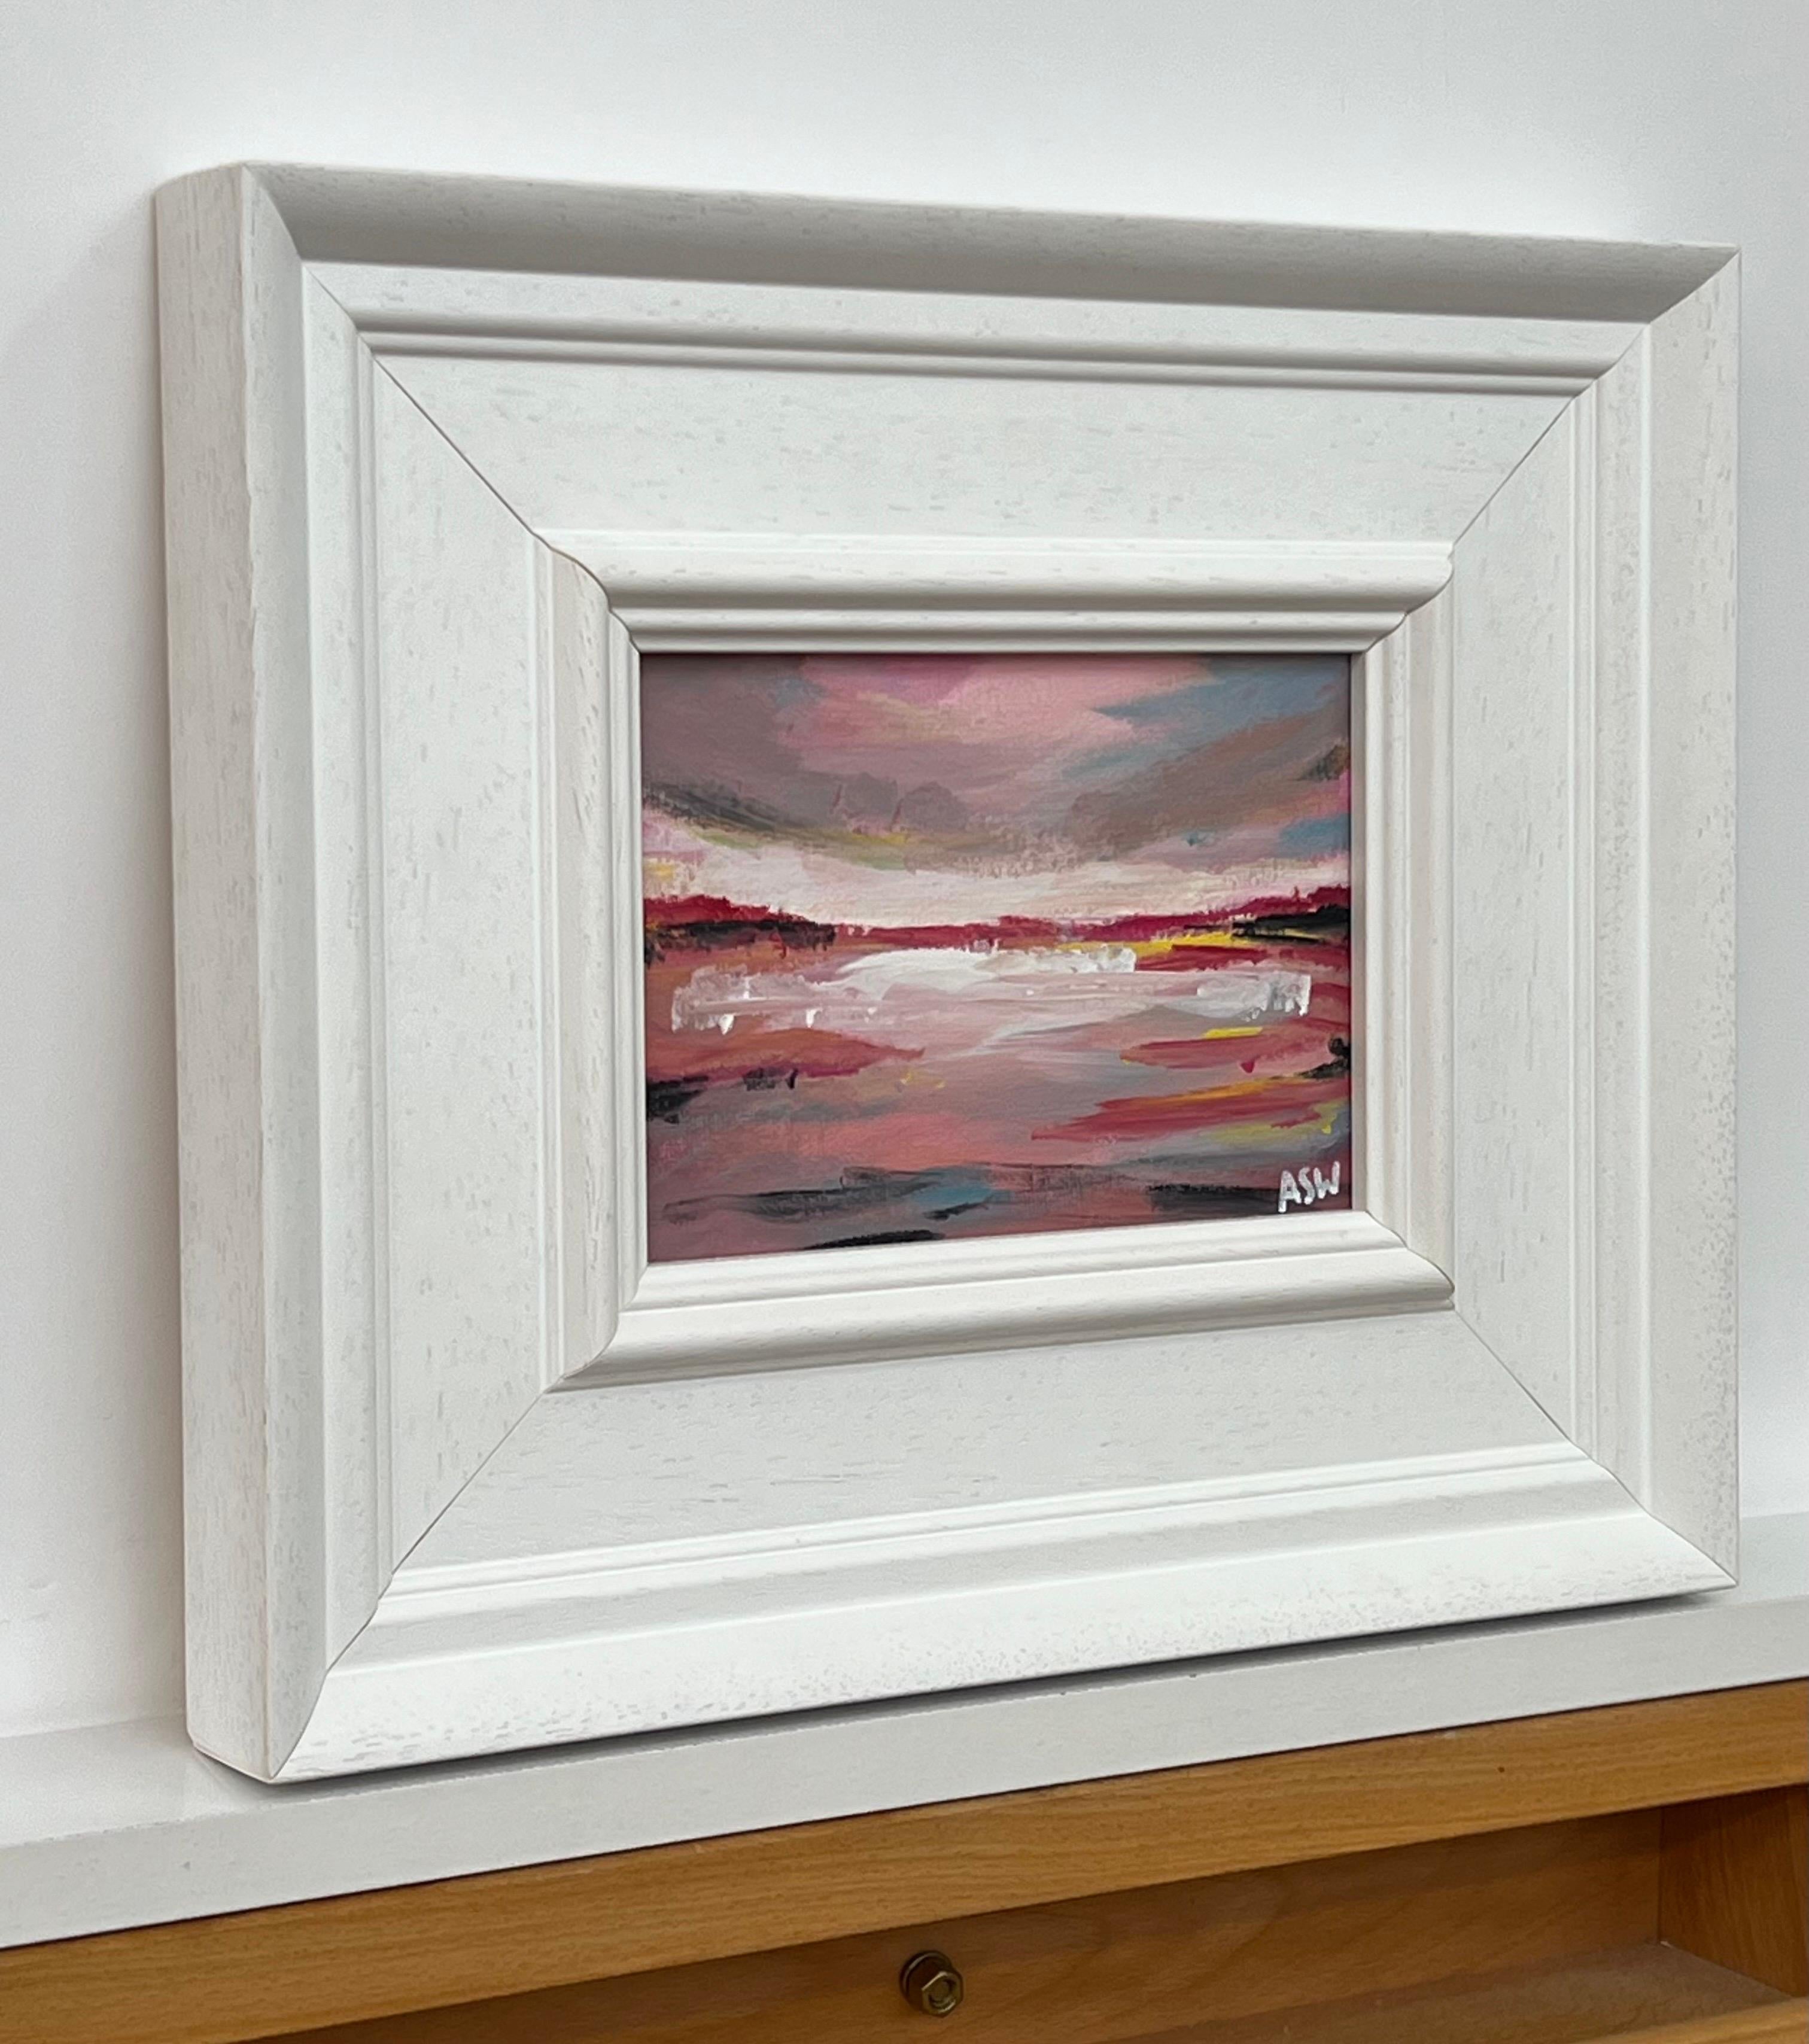 Miniature Abstract Painting Study with Pink by Contemporary British Artist, Angela Wakefield

Art measures 7 x 5 inches
Frame measures 12 x 10 inches

This abstract painting features a harmonious blend of soft hues, primarily in pink, white and